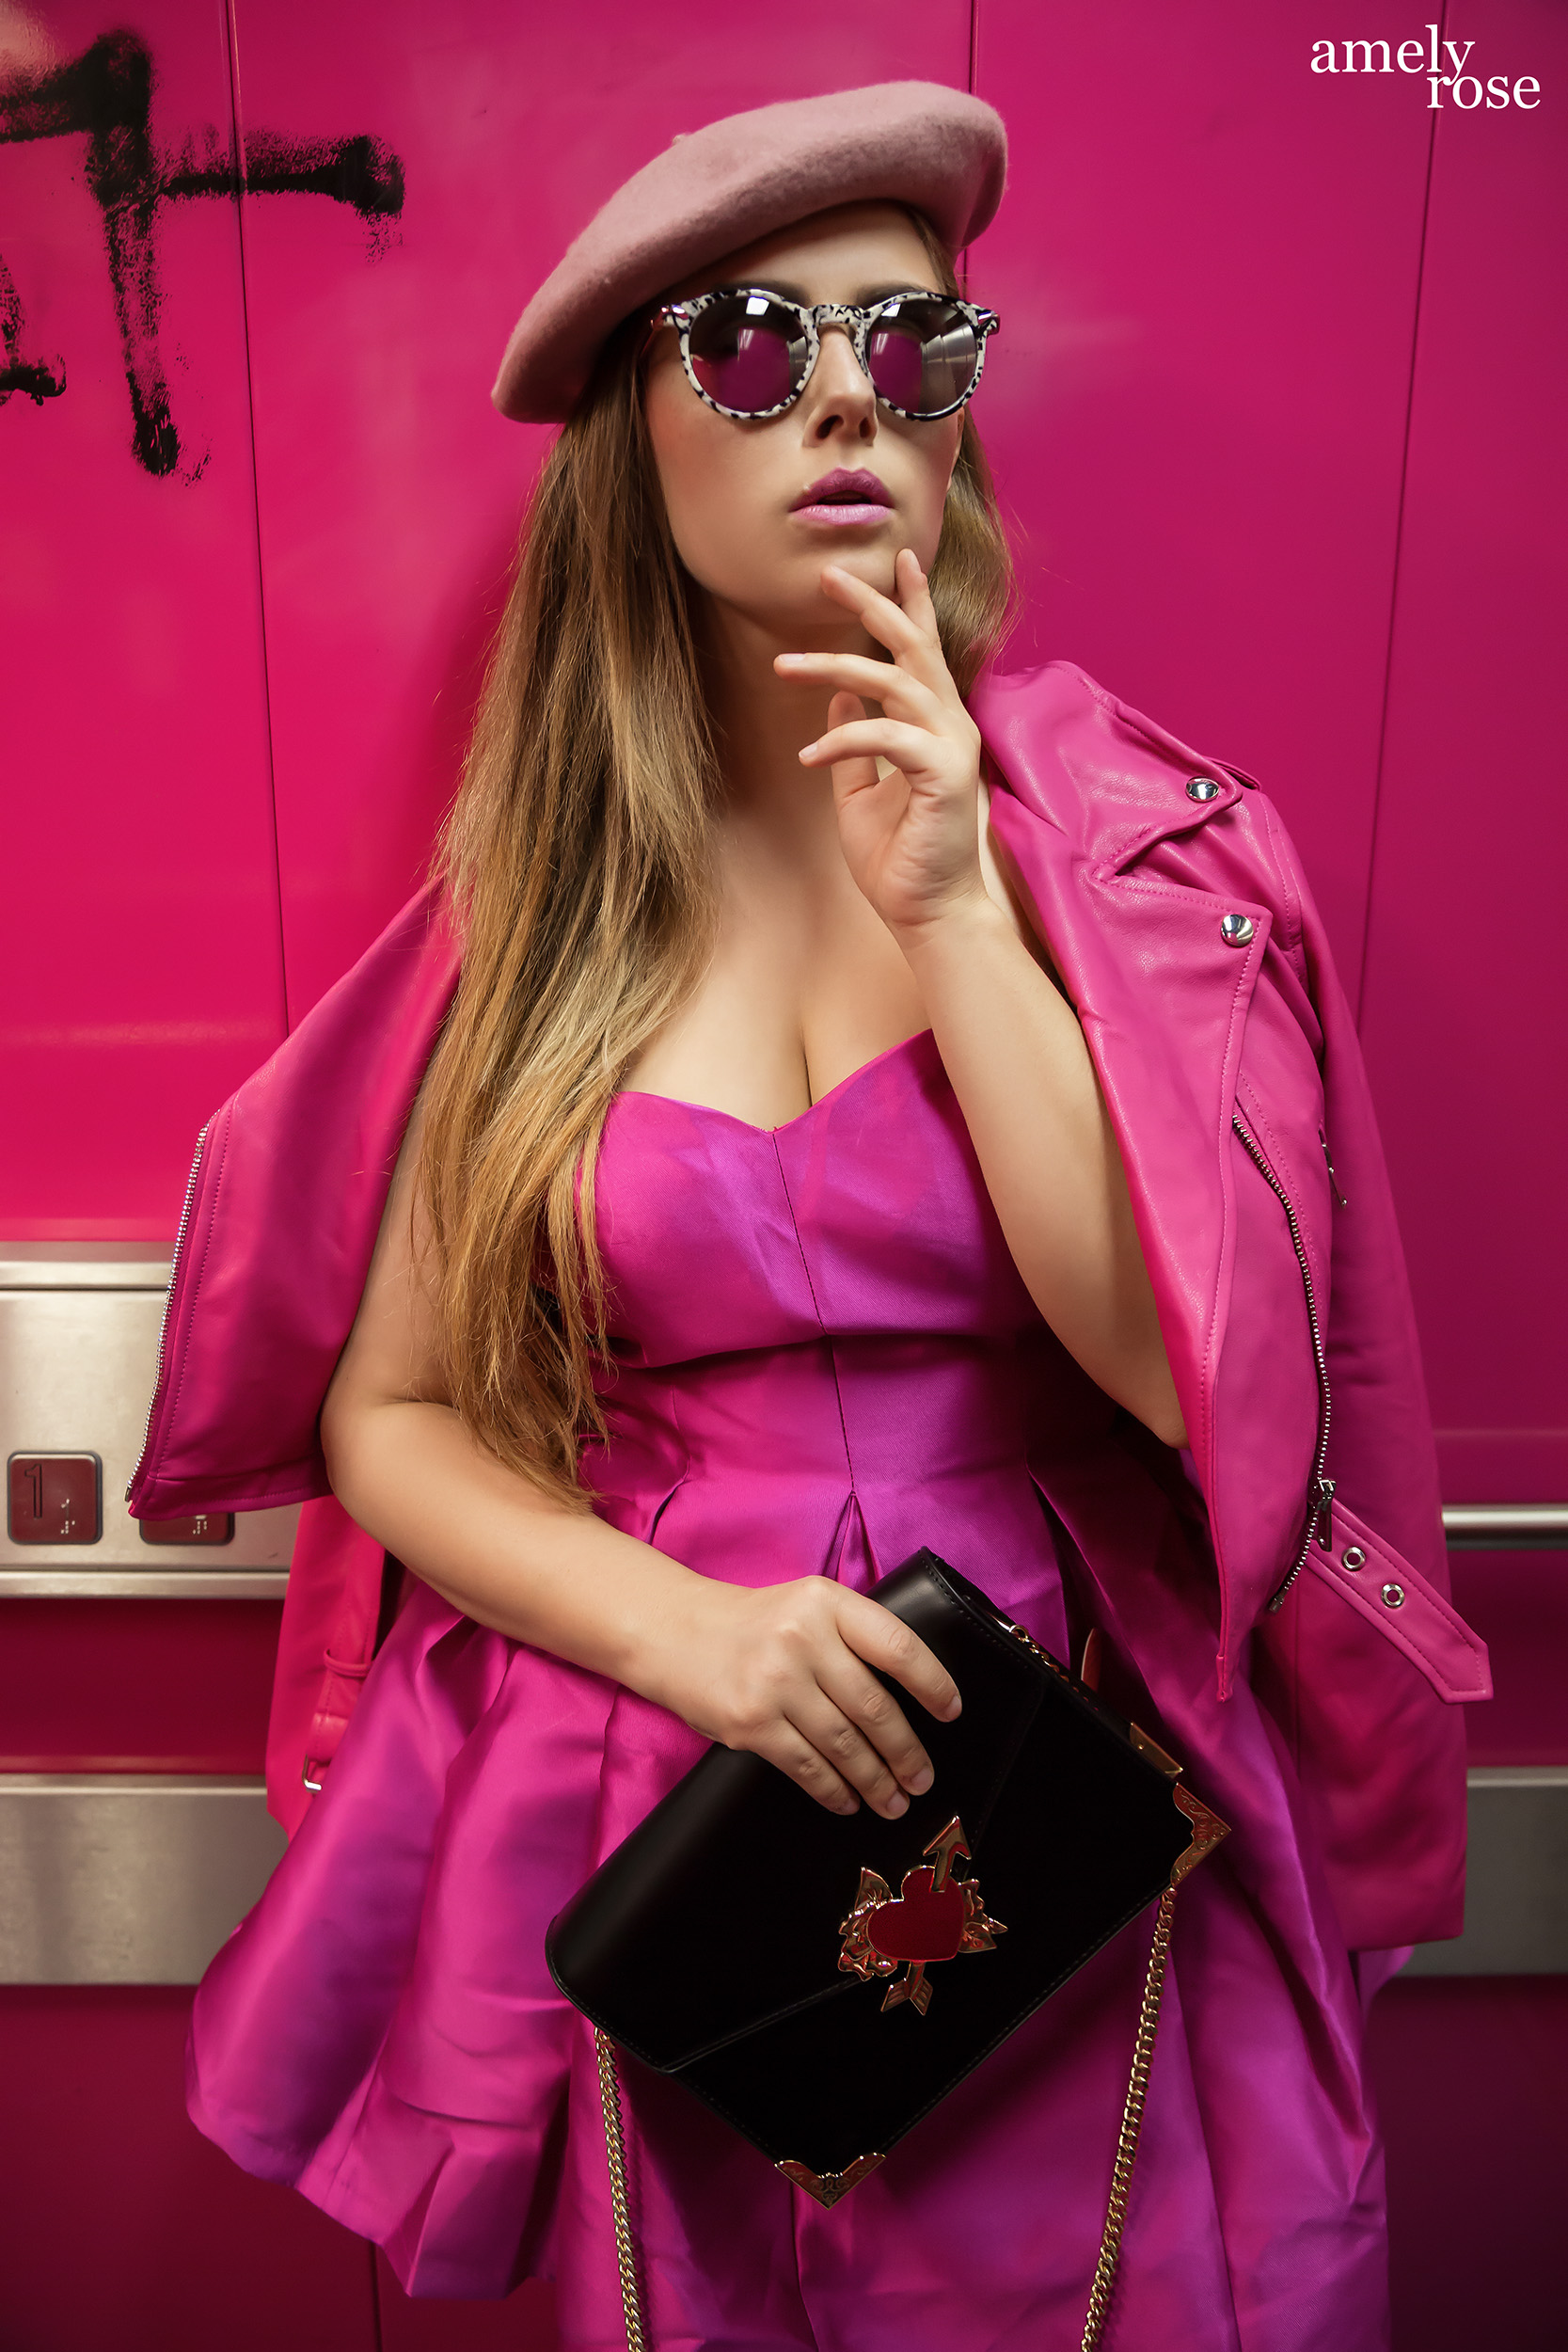 Amely Rose german influencer in a stylish pink #ootd in a lift. This fashioneditorial reminds of #fiftyshadesof rose.